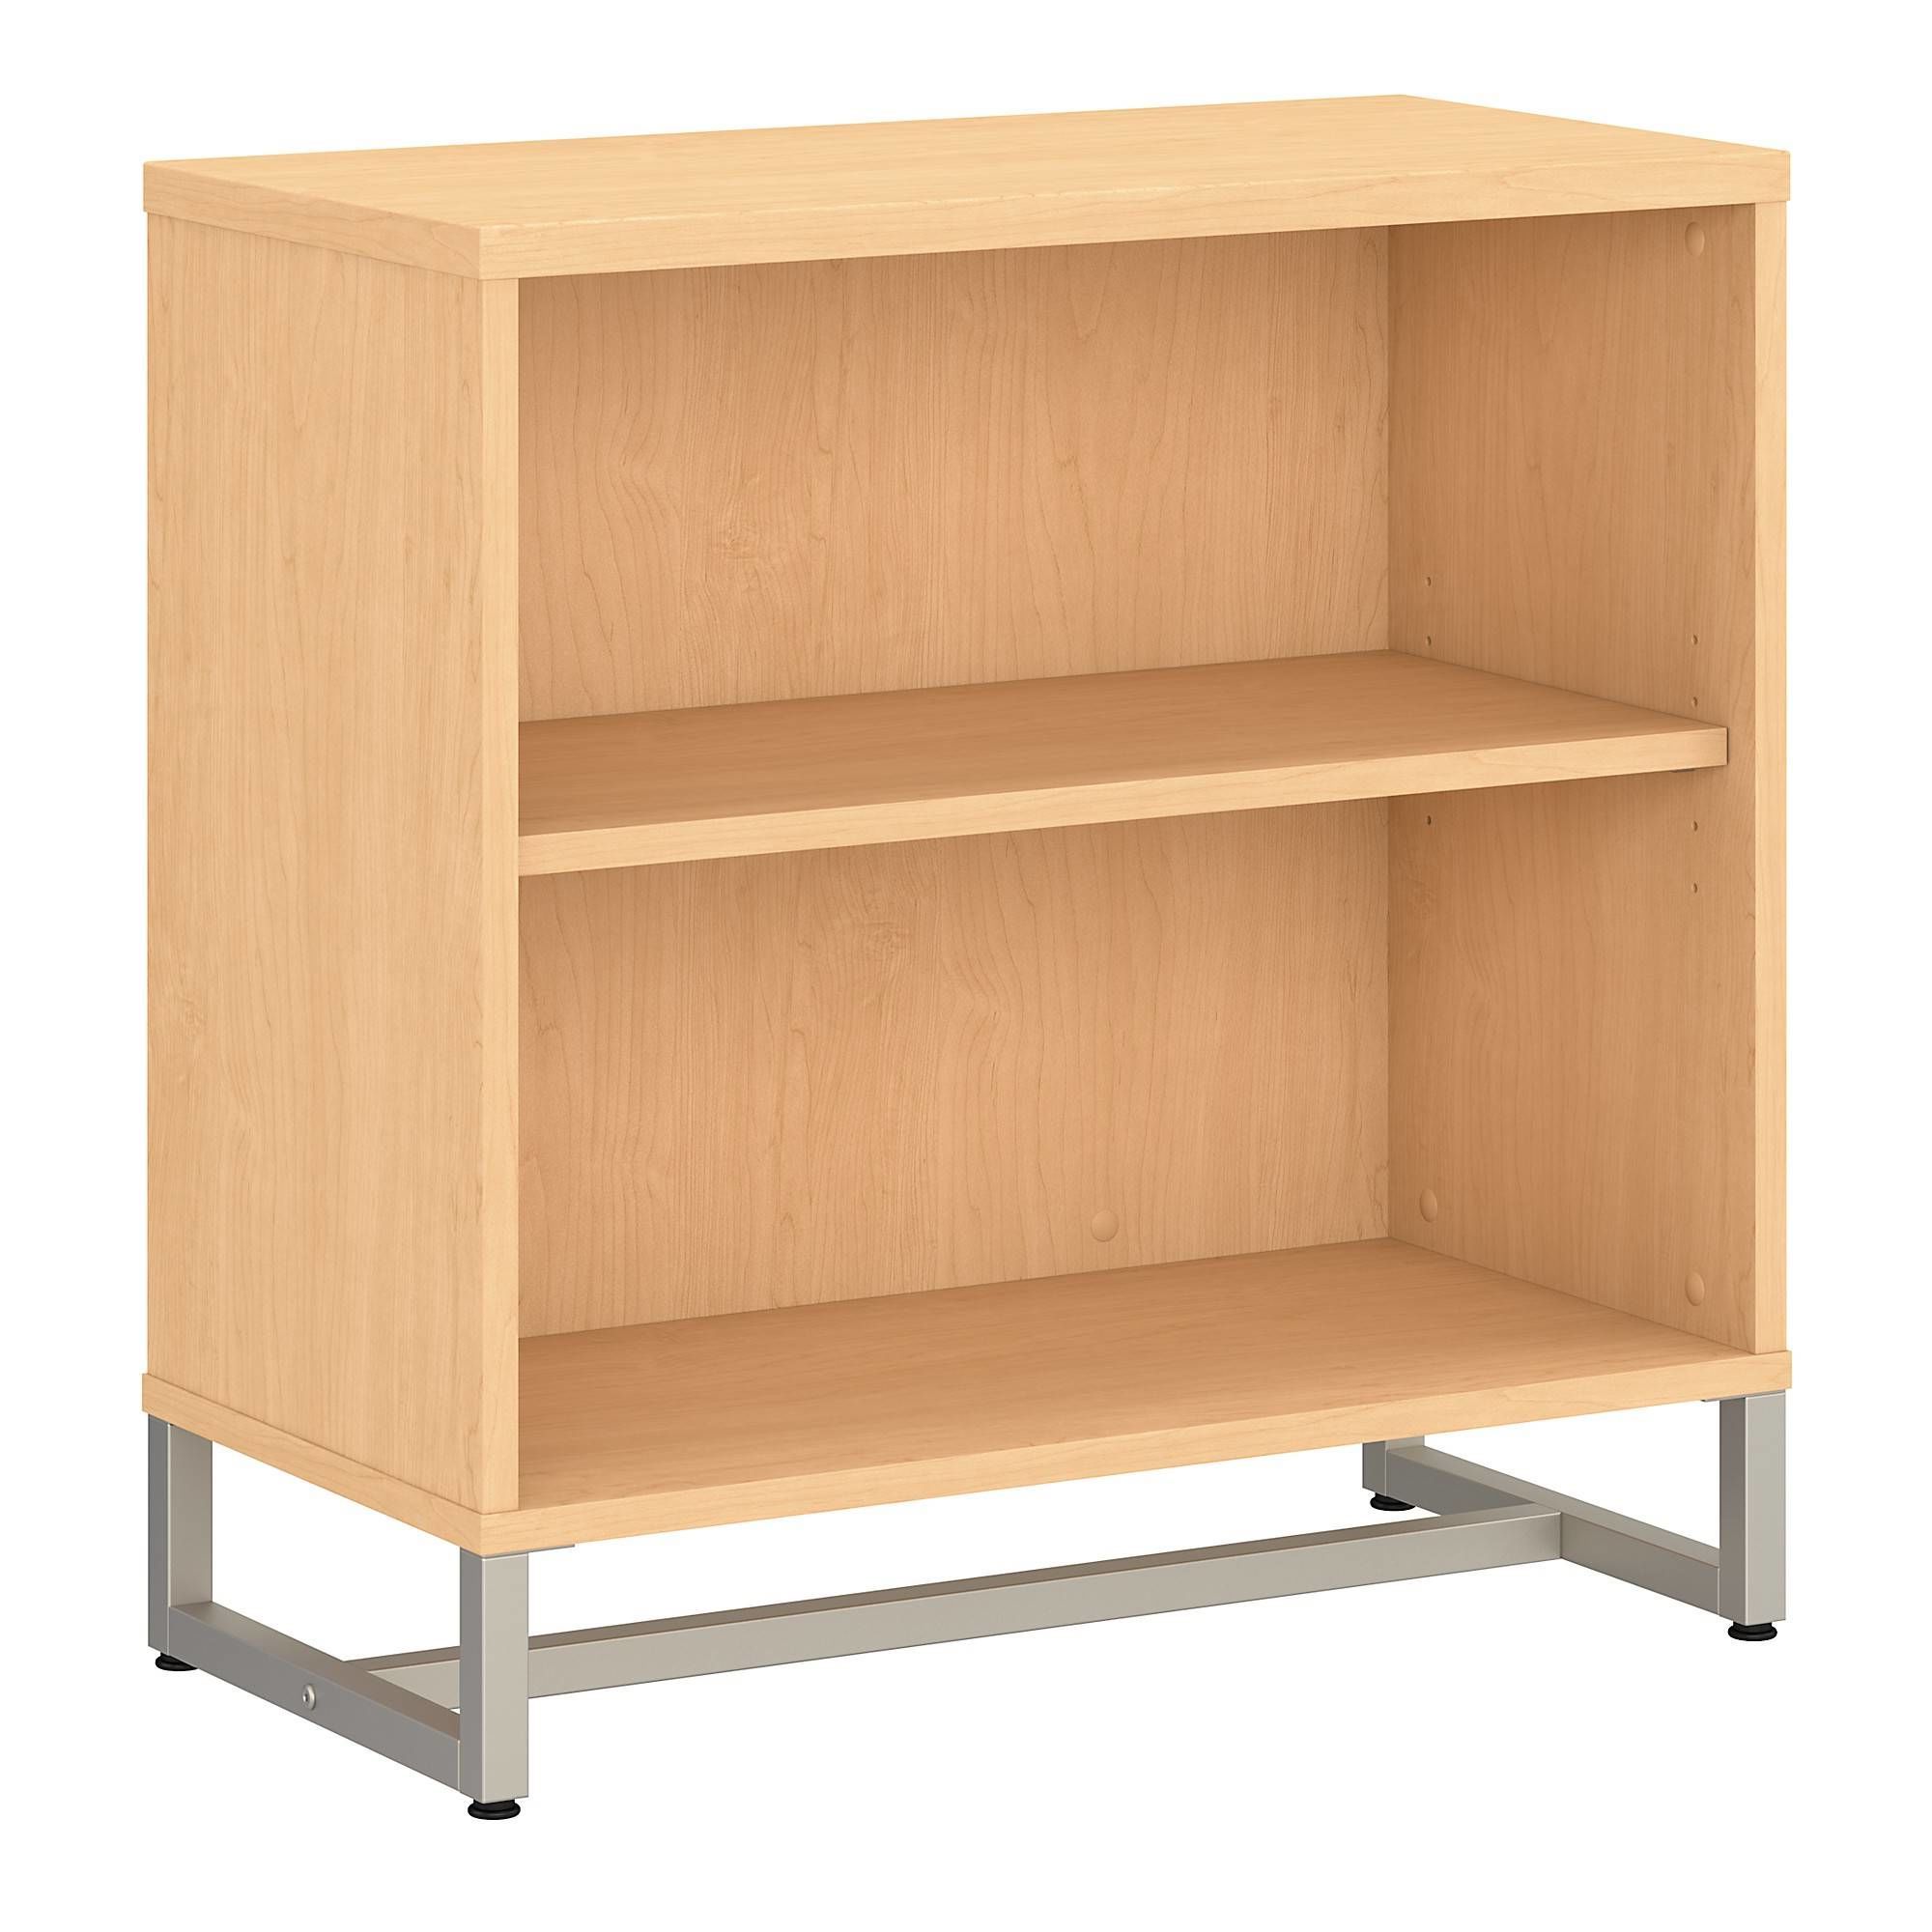 Trendy 2 Shelf Bookcase Cabinet In Natural Maple In Natural Wood And Black 2 Shelf Desks (View 7 of 15)